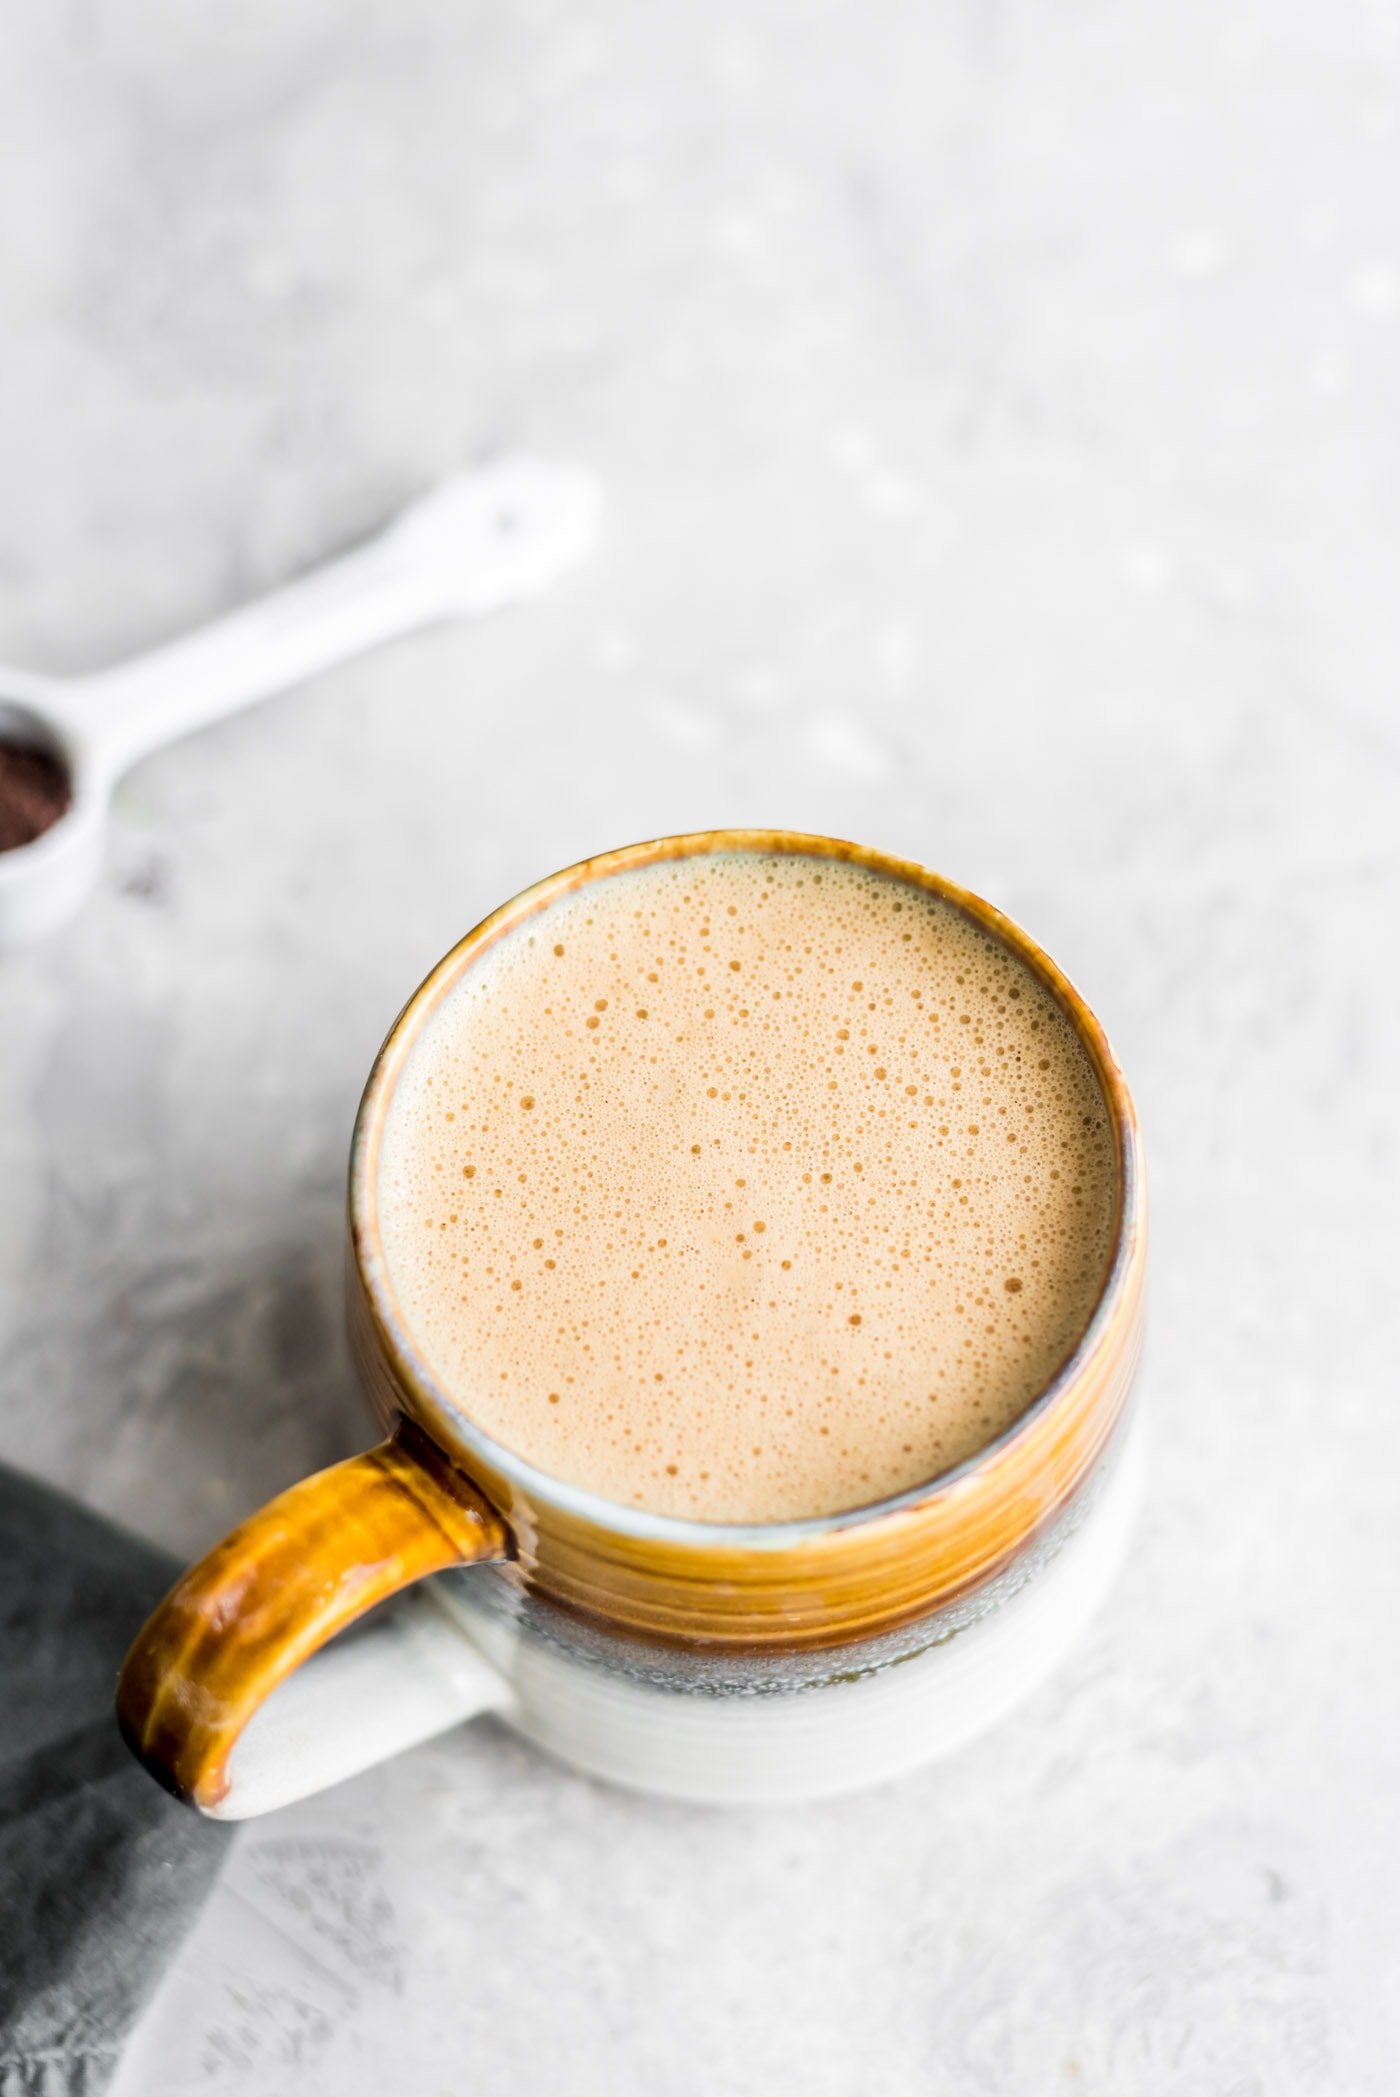 Keto Coffee Recipes to Get More From Your Bulletproof Coffee